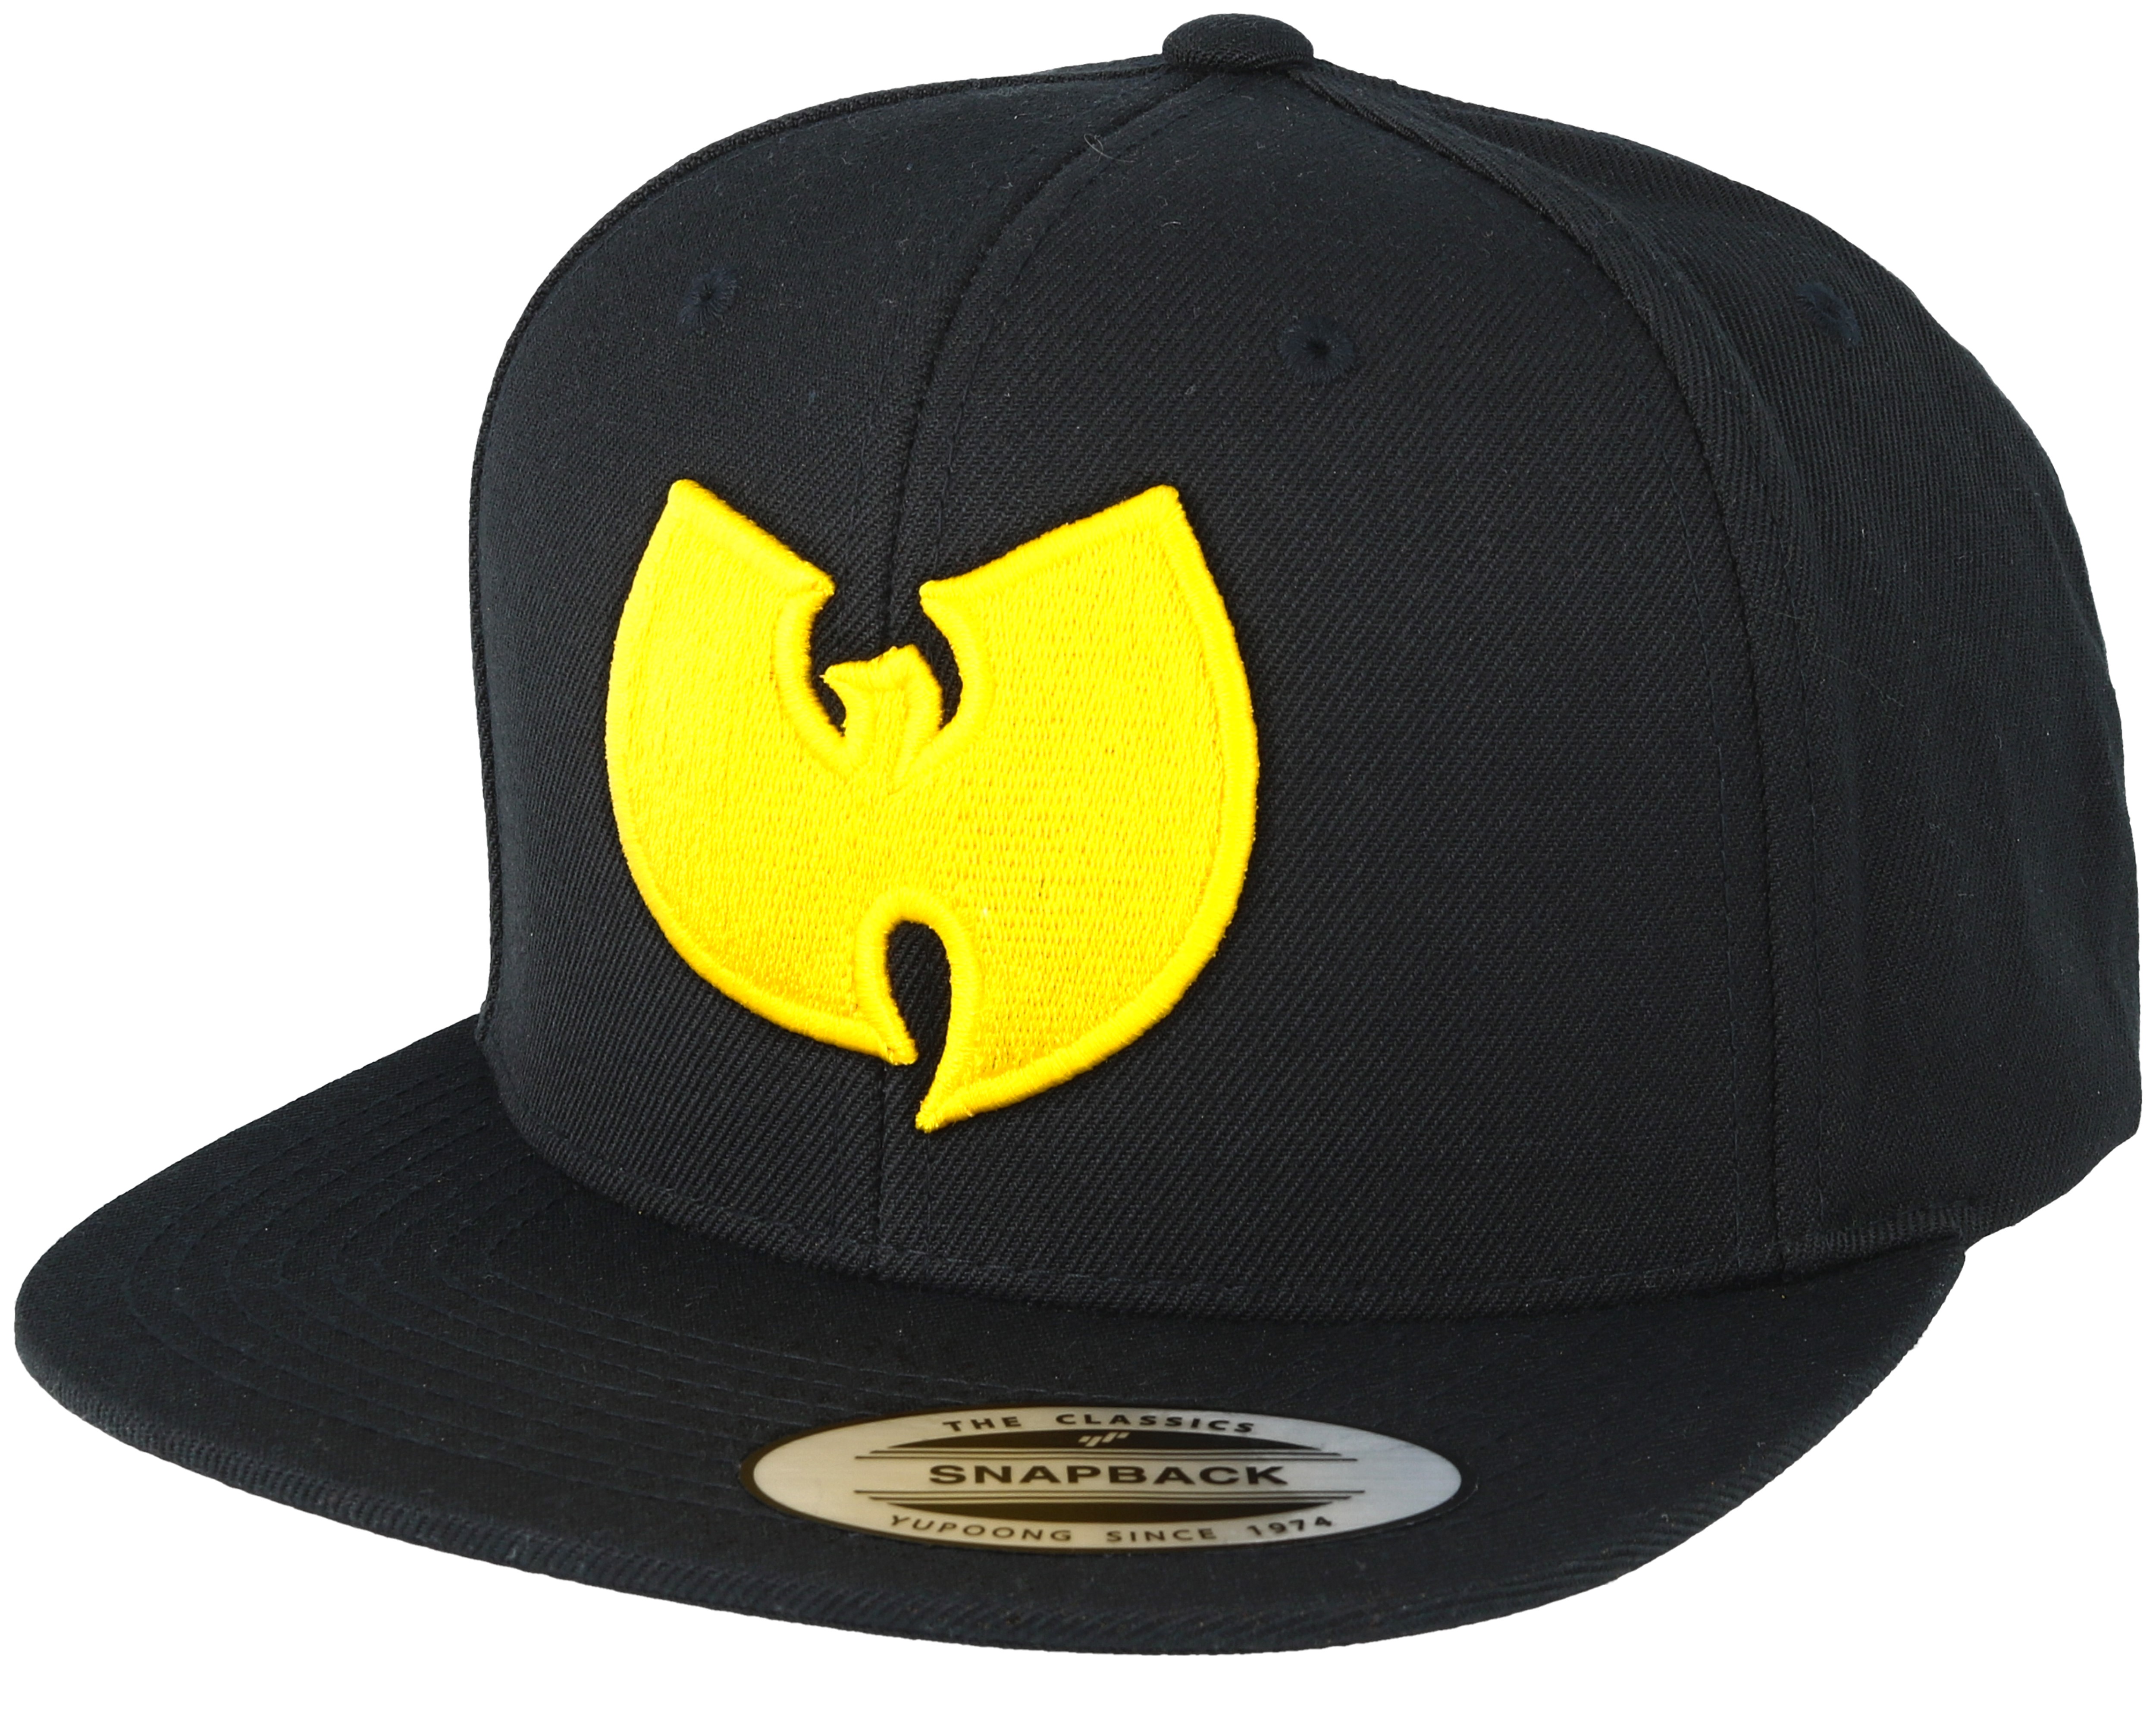 Shop Wu-Tang Black/Gold Snapback - Mister Tee caps from Hatstore.co.nz. 